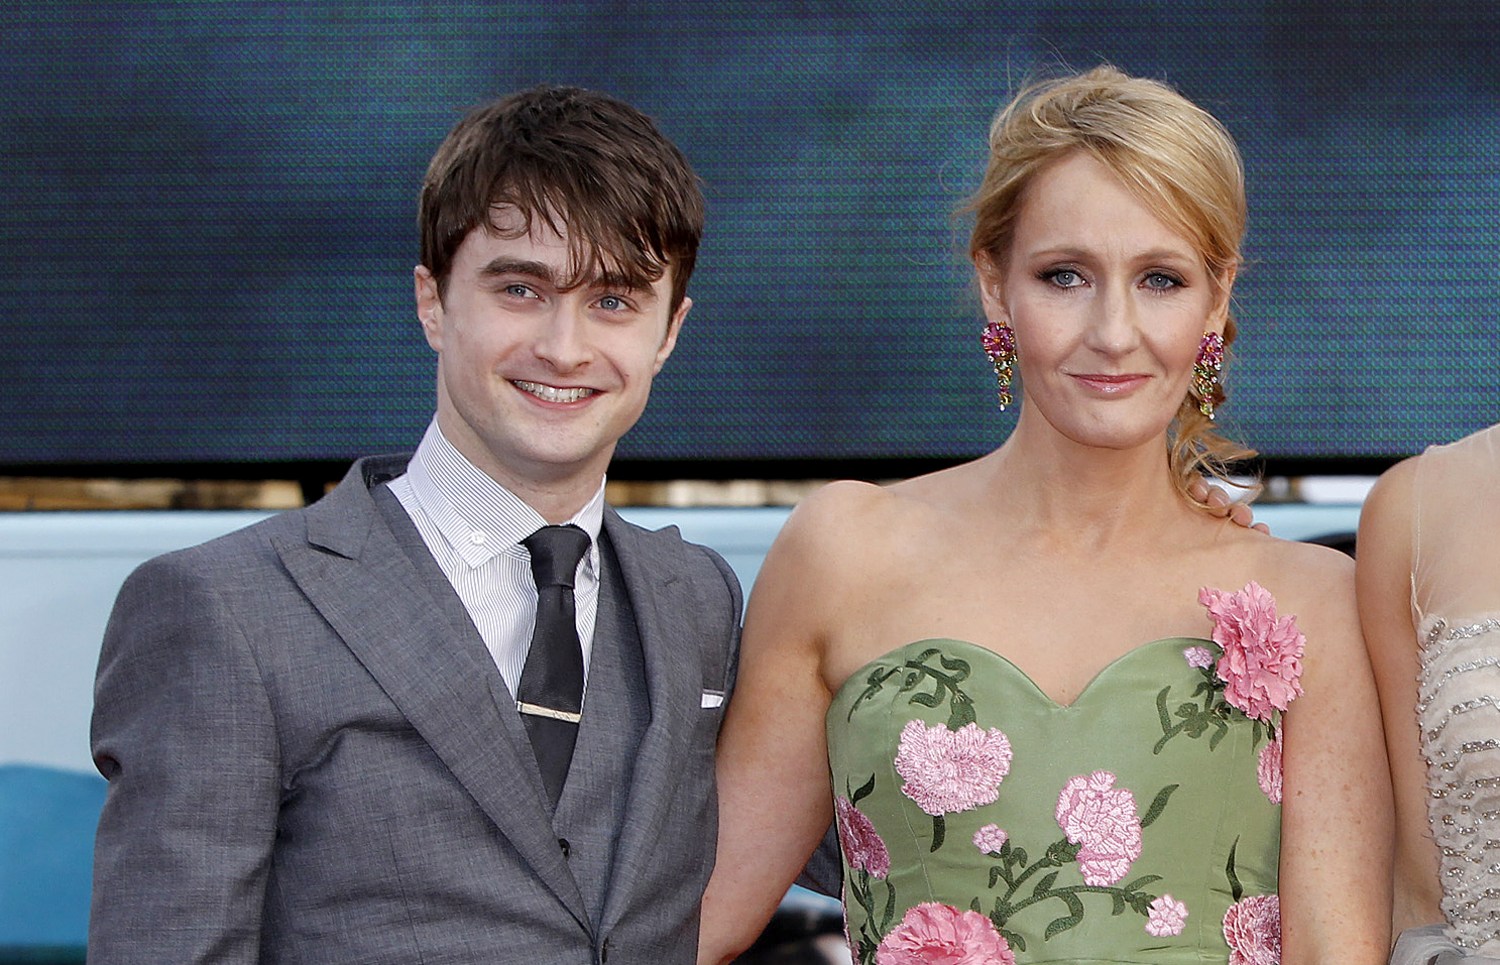 Transgender Women Are Women Daniel Radcliffe Clashes With J K Rowling